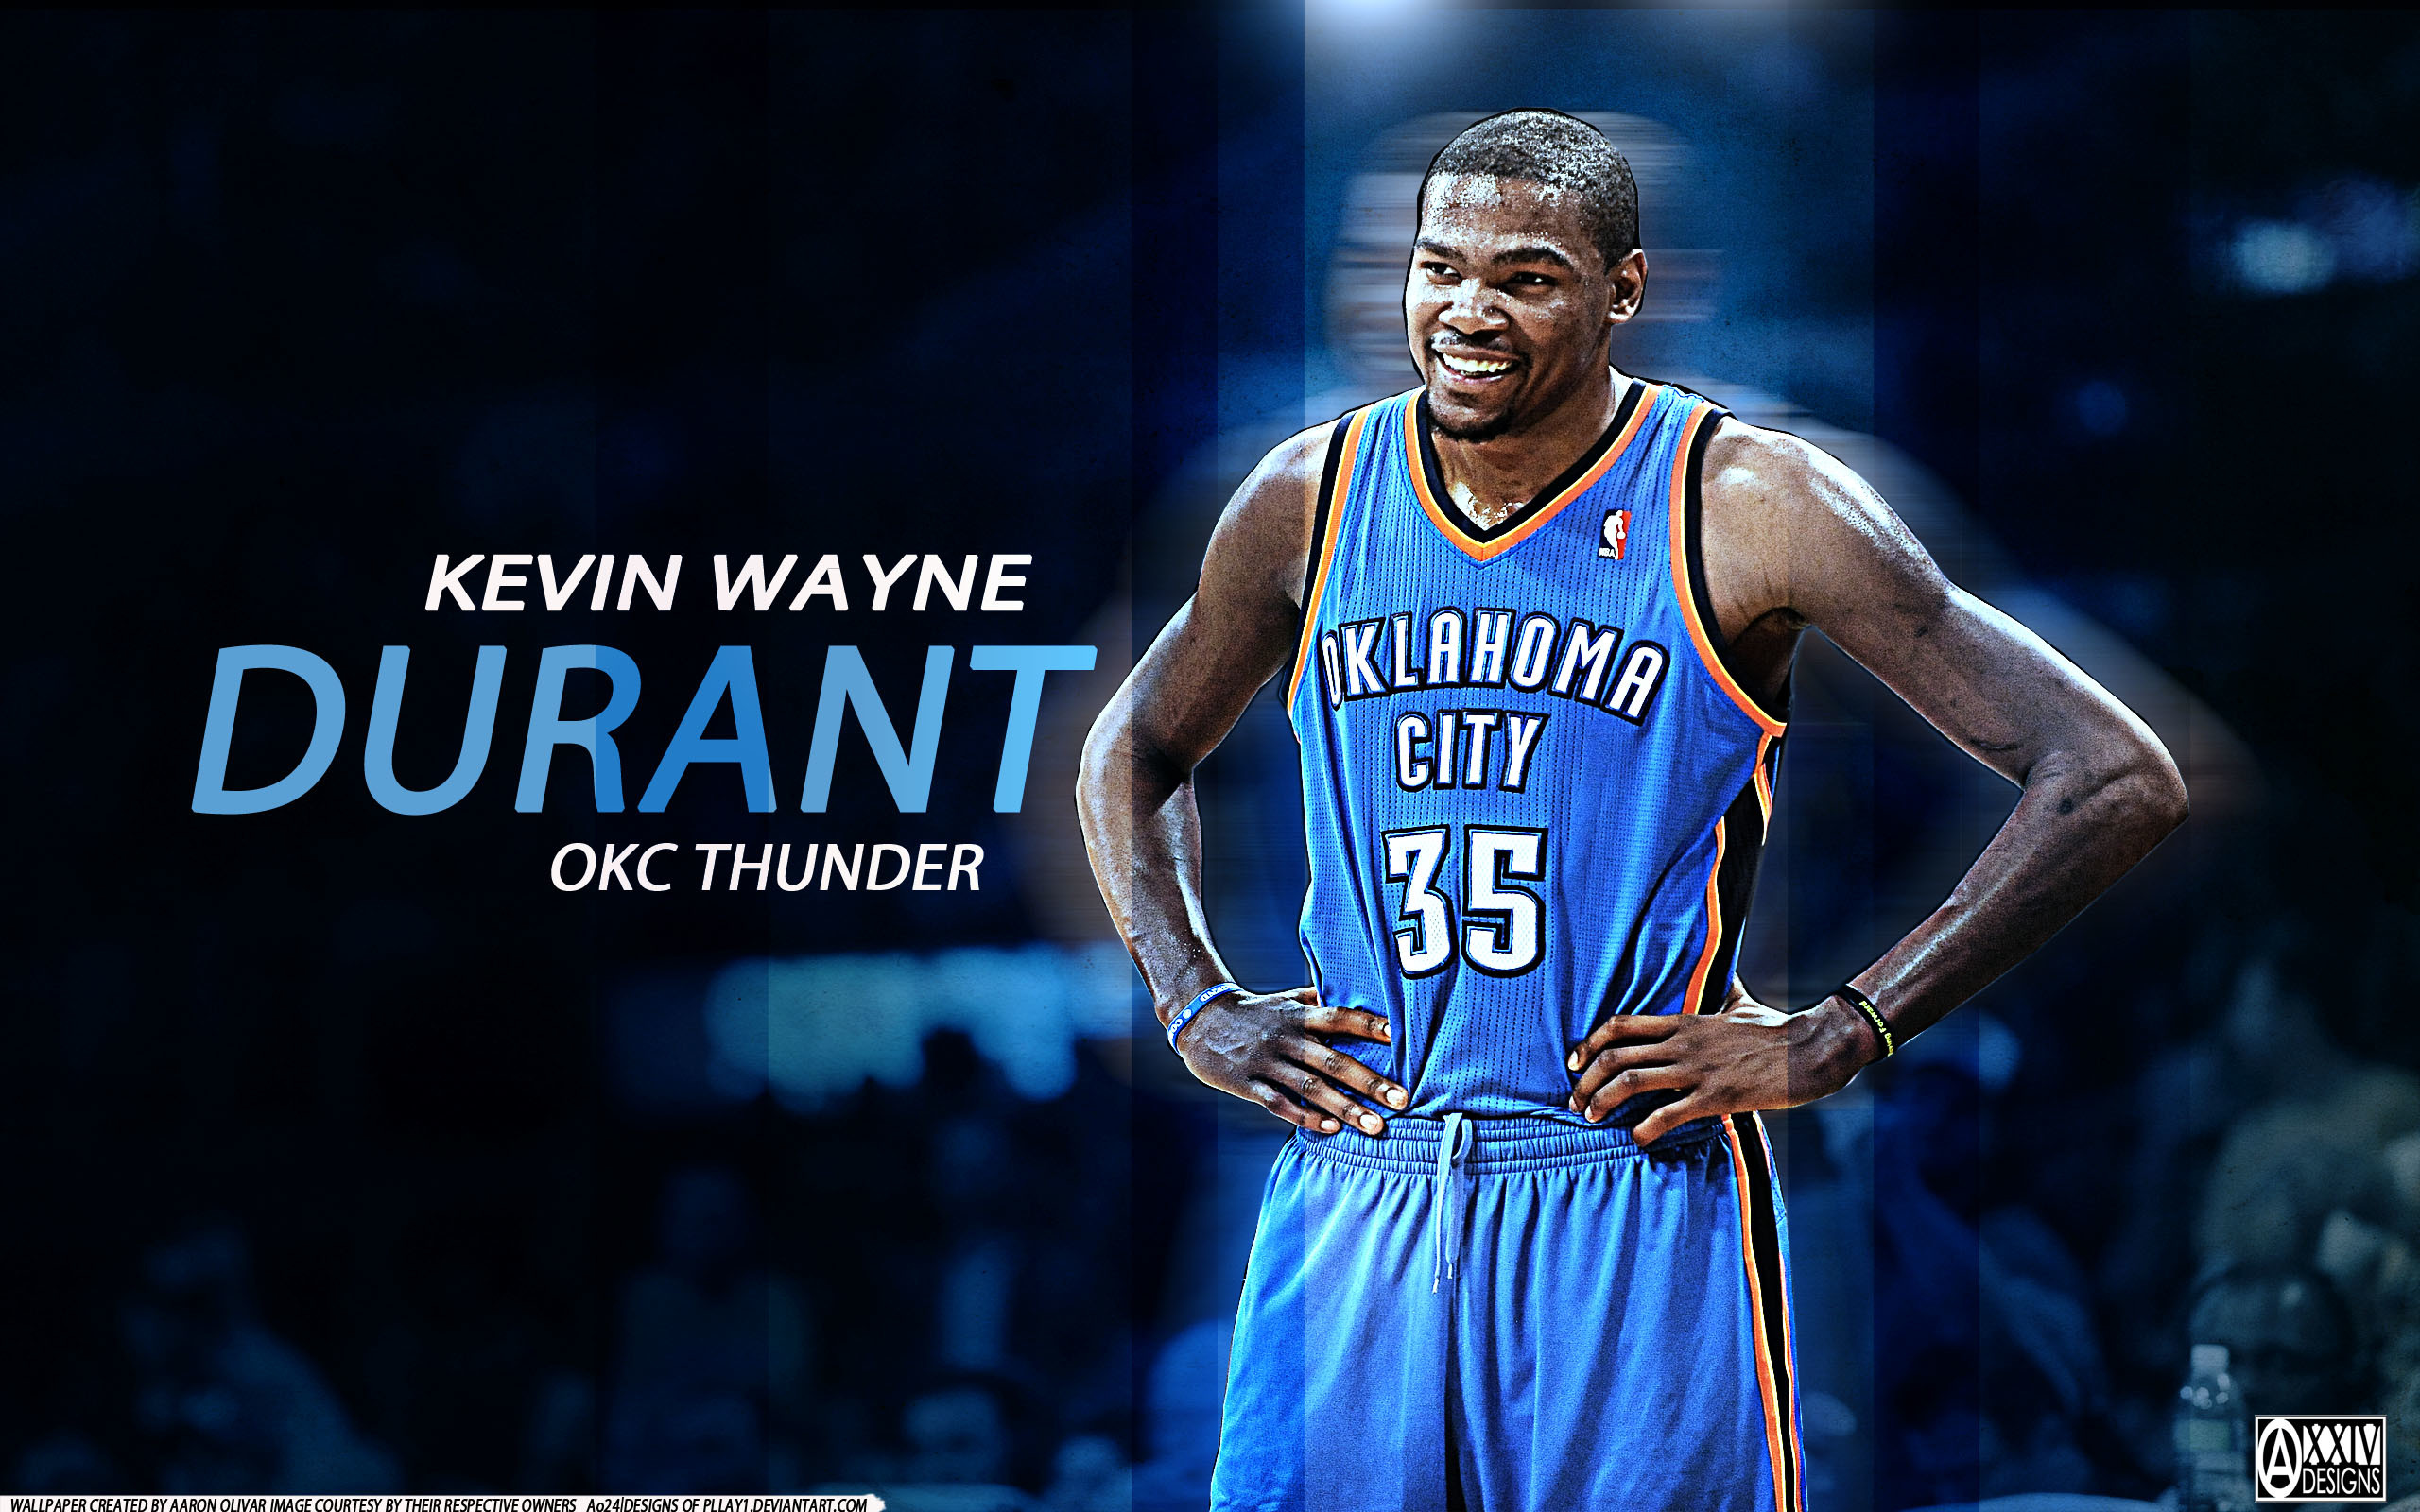 2560x1600 Kevin Durant Russell Westbrook Wallpaper | HD Wallpapers | Pinterest |  Kevin durant, Wallpaper and Wallpaper backgrounds